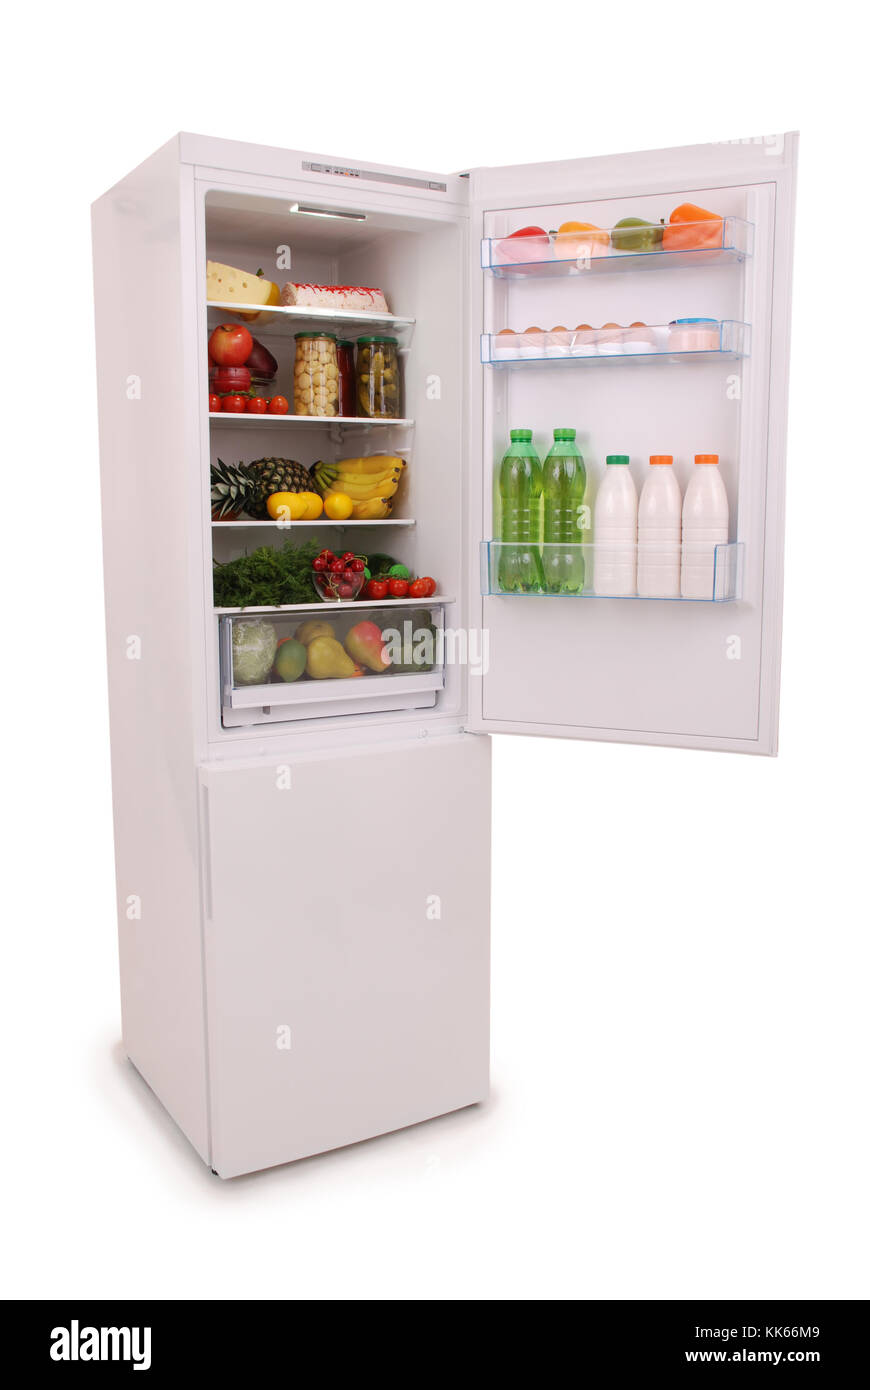 Open refrigerator full with some kinds of food and drinks Stock Photo